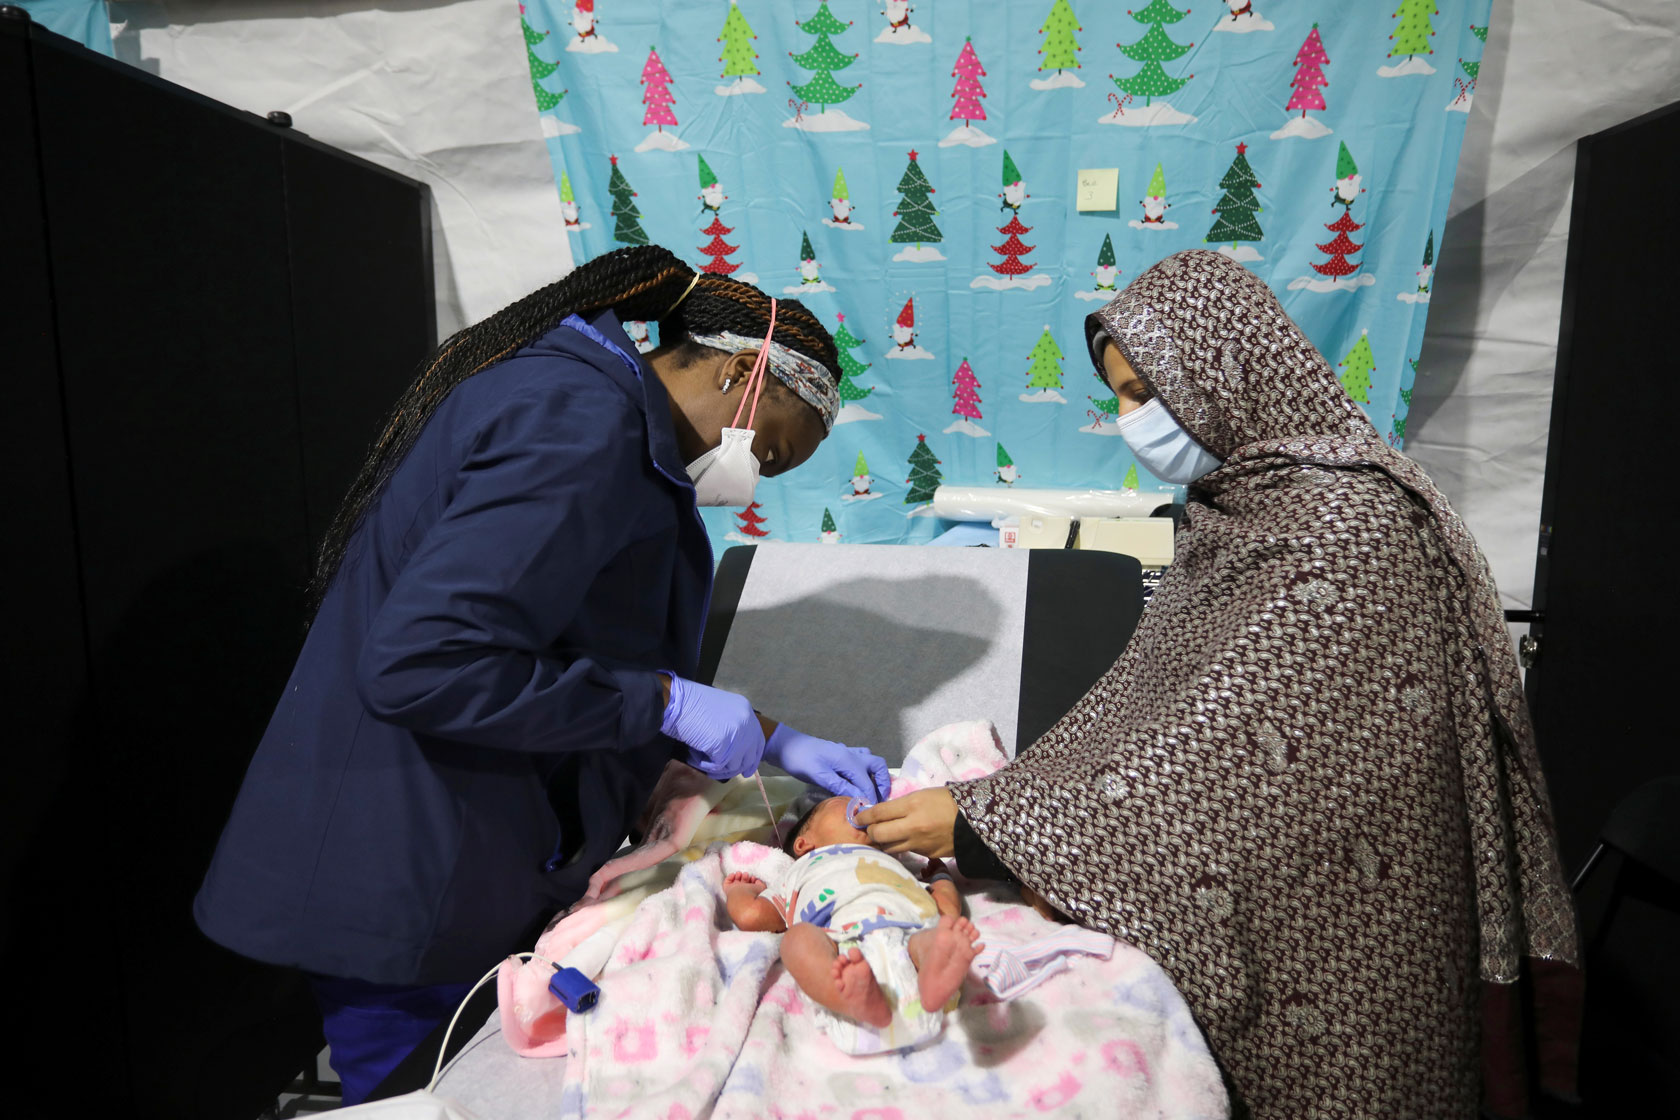 A nurse, right, attends to a 9-day-old child as the child’s mother looks on.